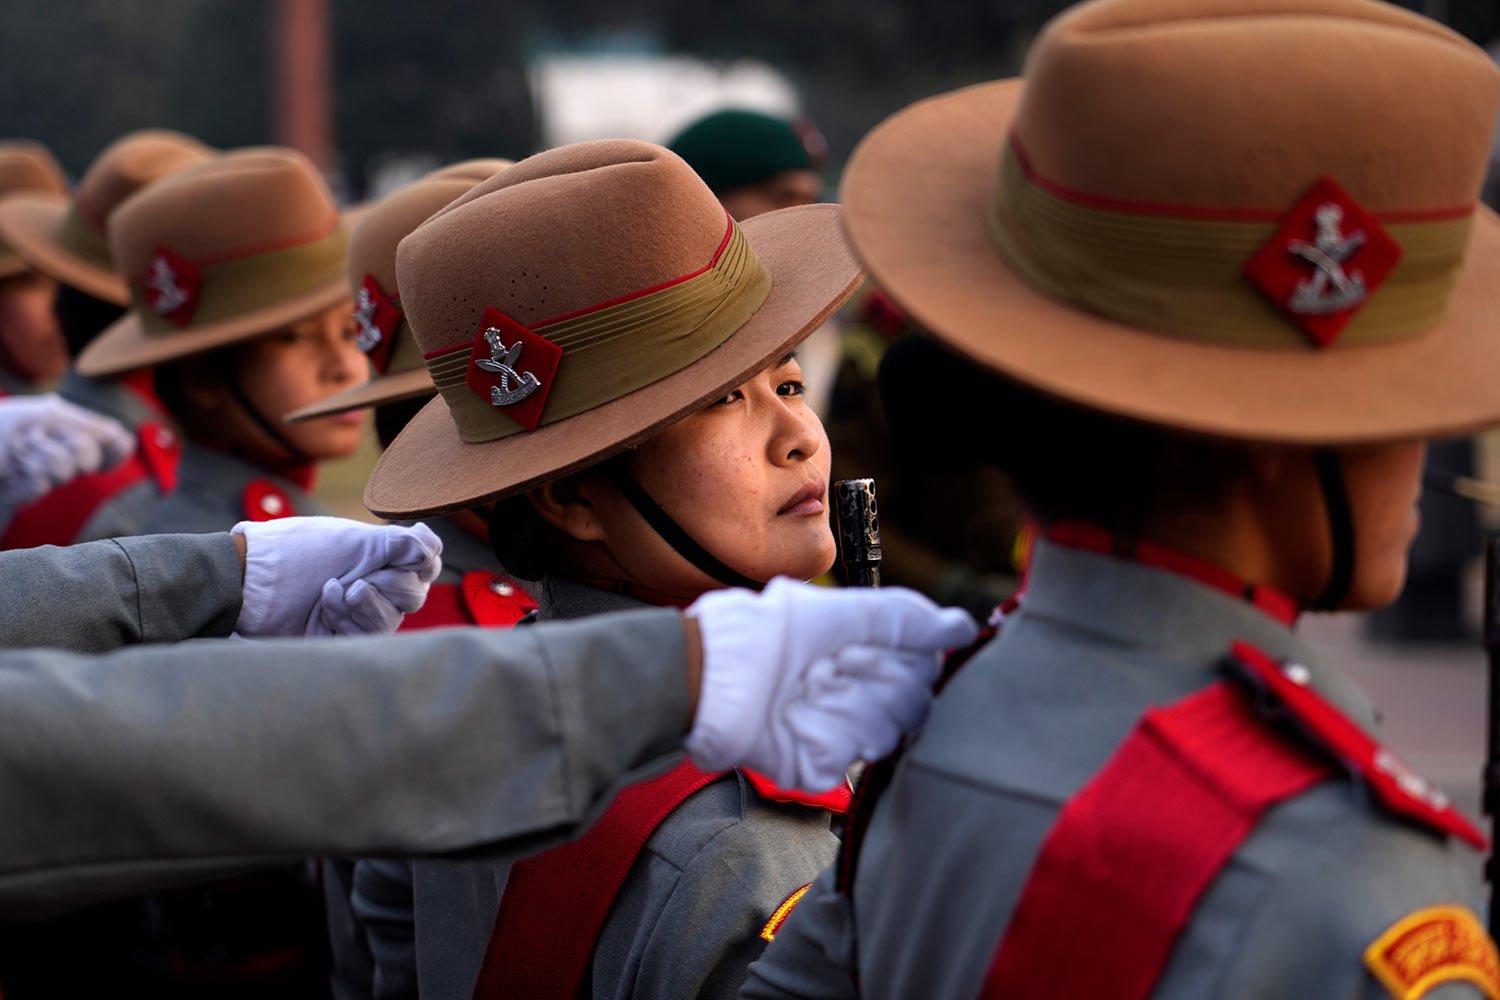  Women soldiers of Assam Rifles, an Indian paramilitary force, practice a march-past for the upcoming Republic day parade in New Delhi, India, Thursday, Jan. 19, 2023. (AP Photo/Manish Swarup) 